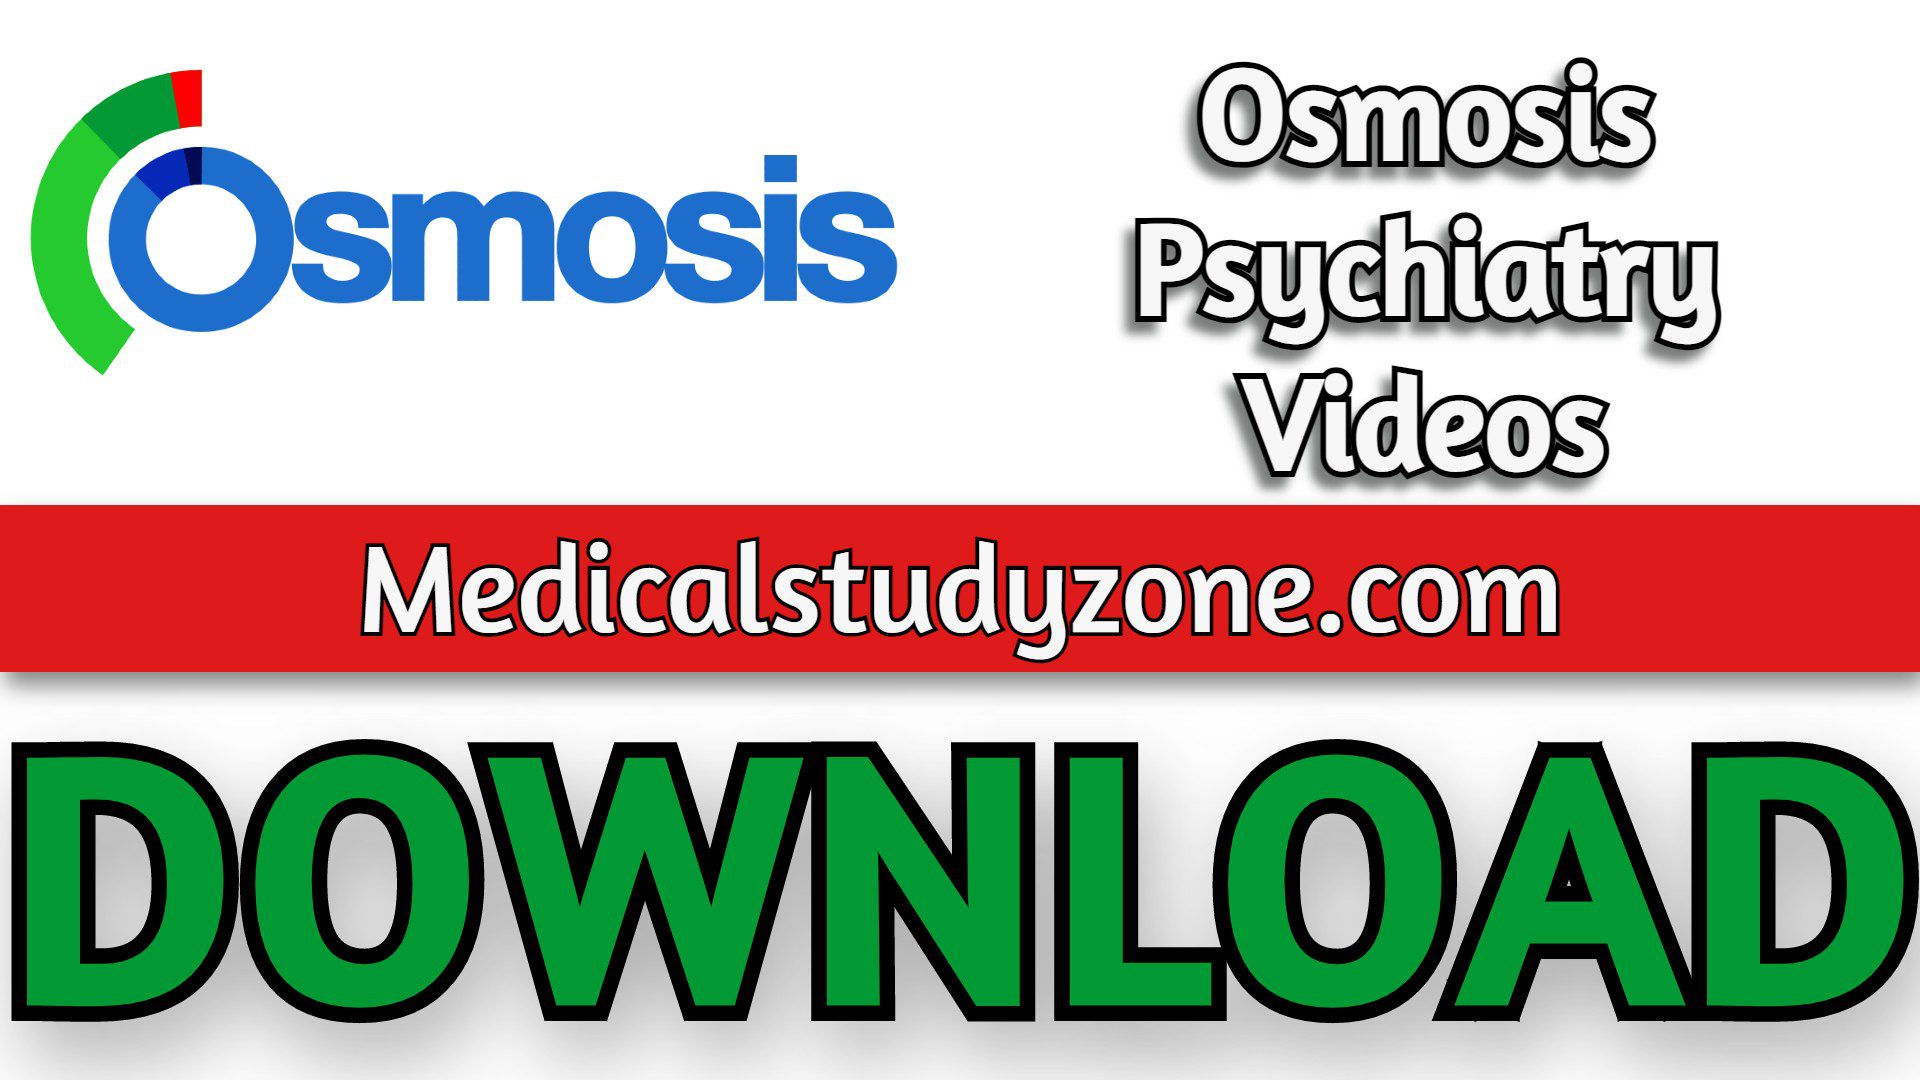 Osmosis Psychiatry Videos 2023 Free Download